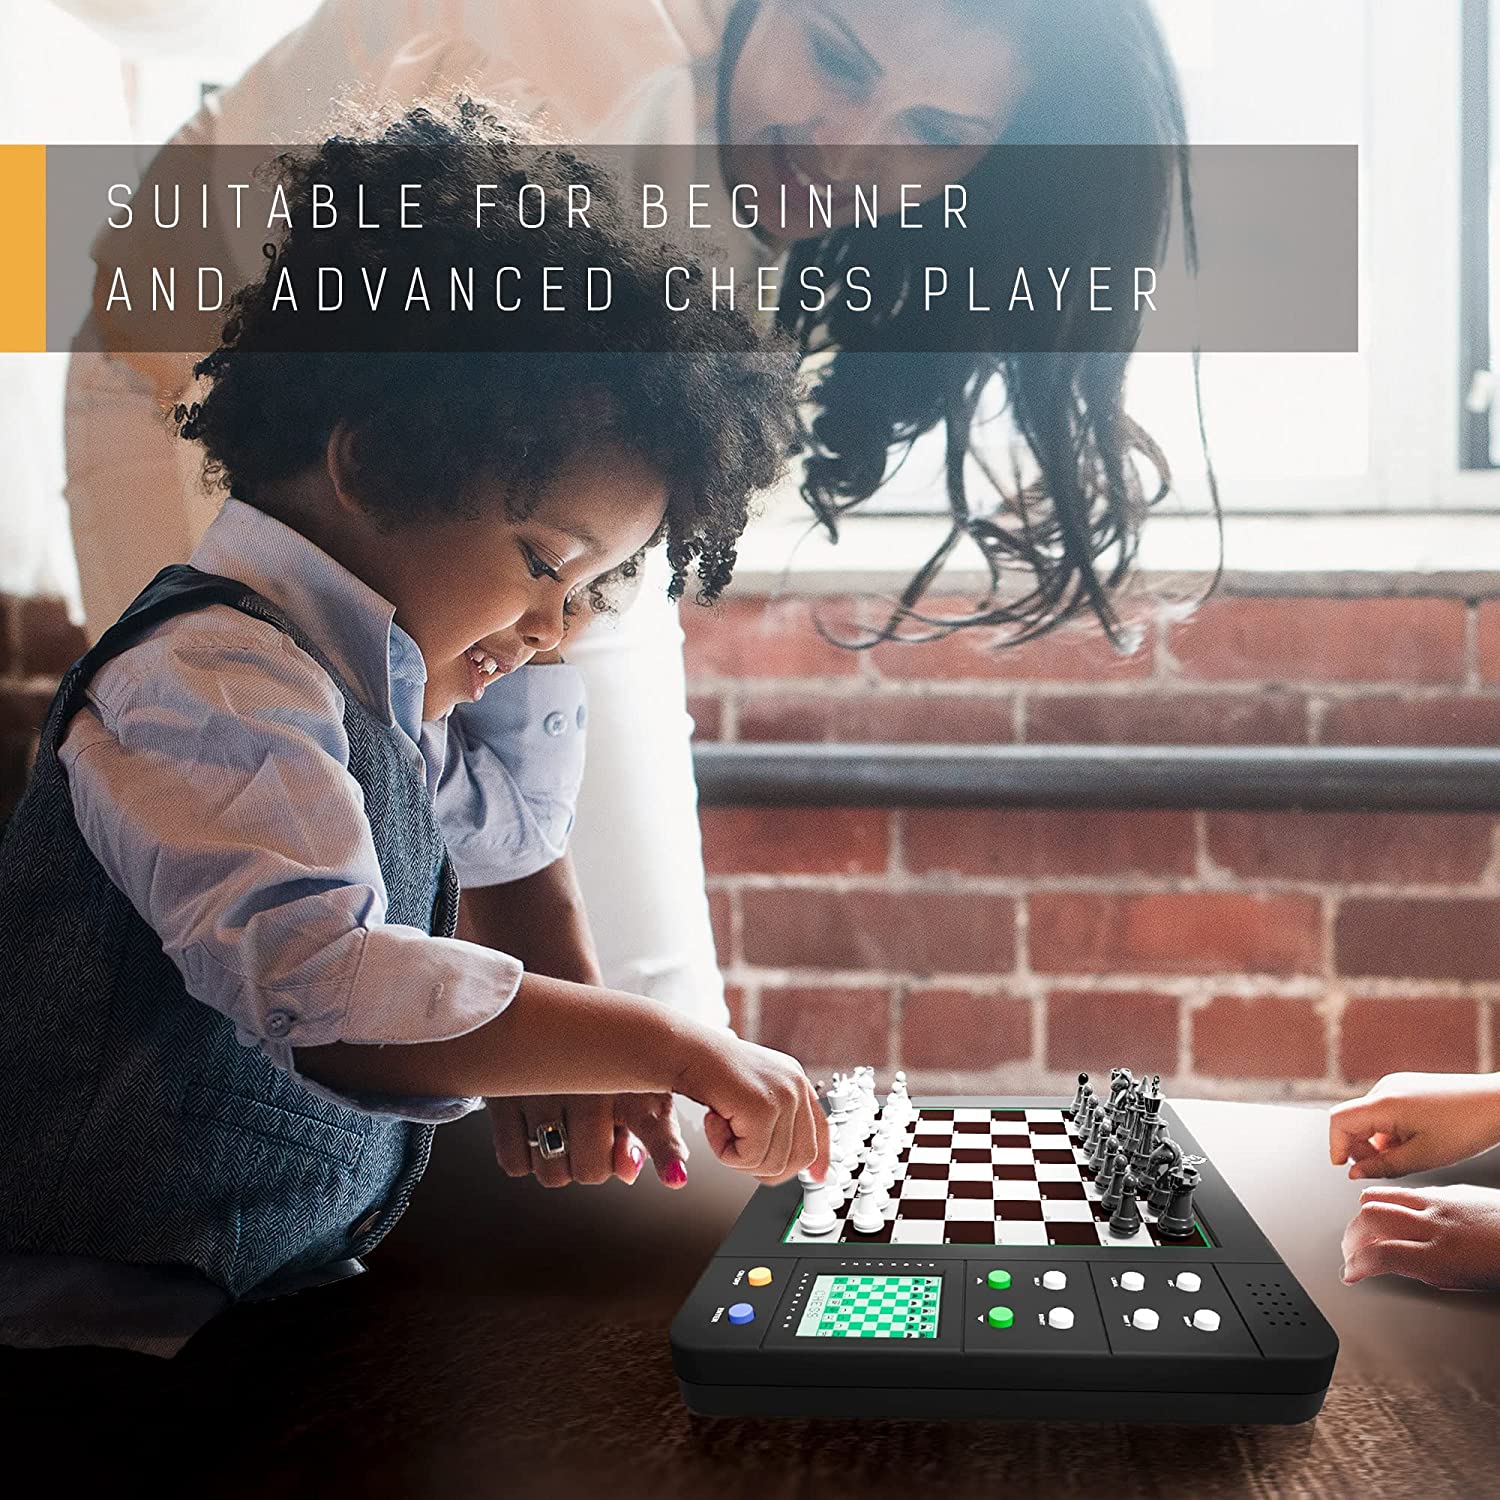 Top 1 Chess Electronic Chess Set, Chess Sets for Adults